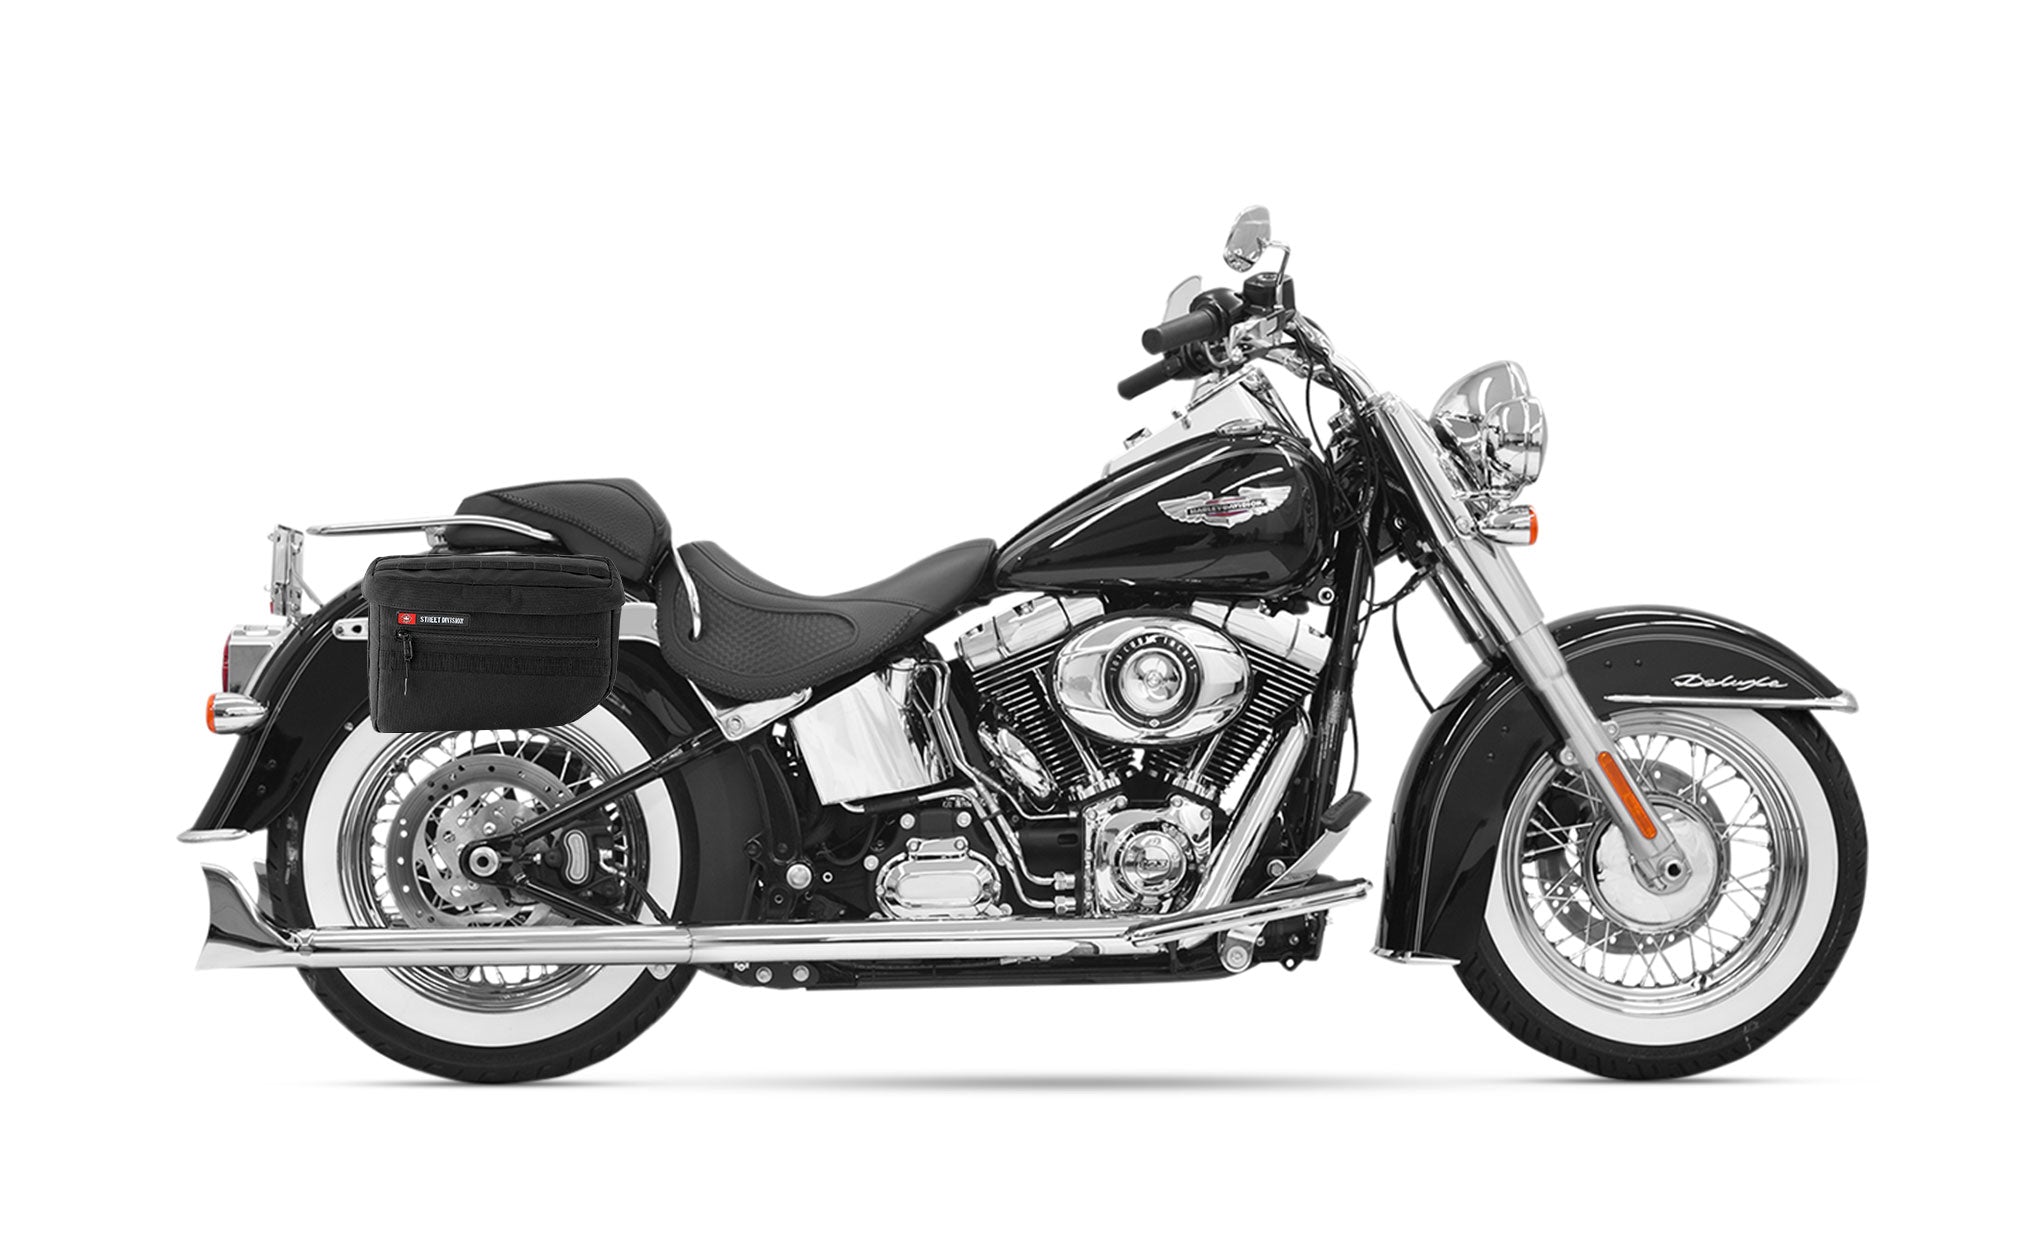 27L - Patriot Large Motorcycle Throw Over Saddlebags for Harley Softail Heritage FLST/I/C/CI on Bike Photo @expand